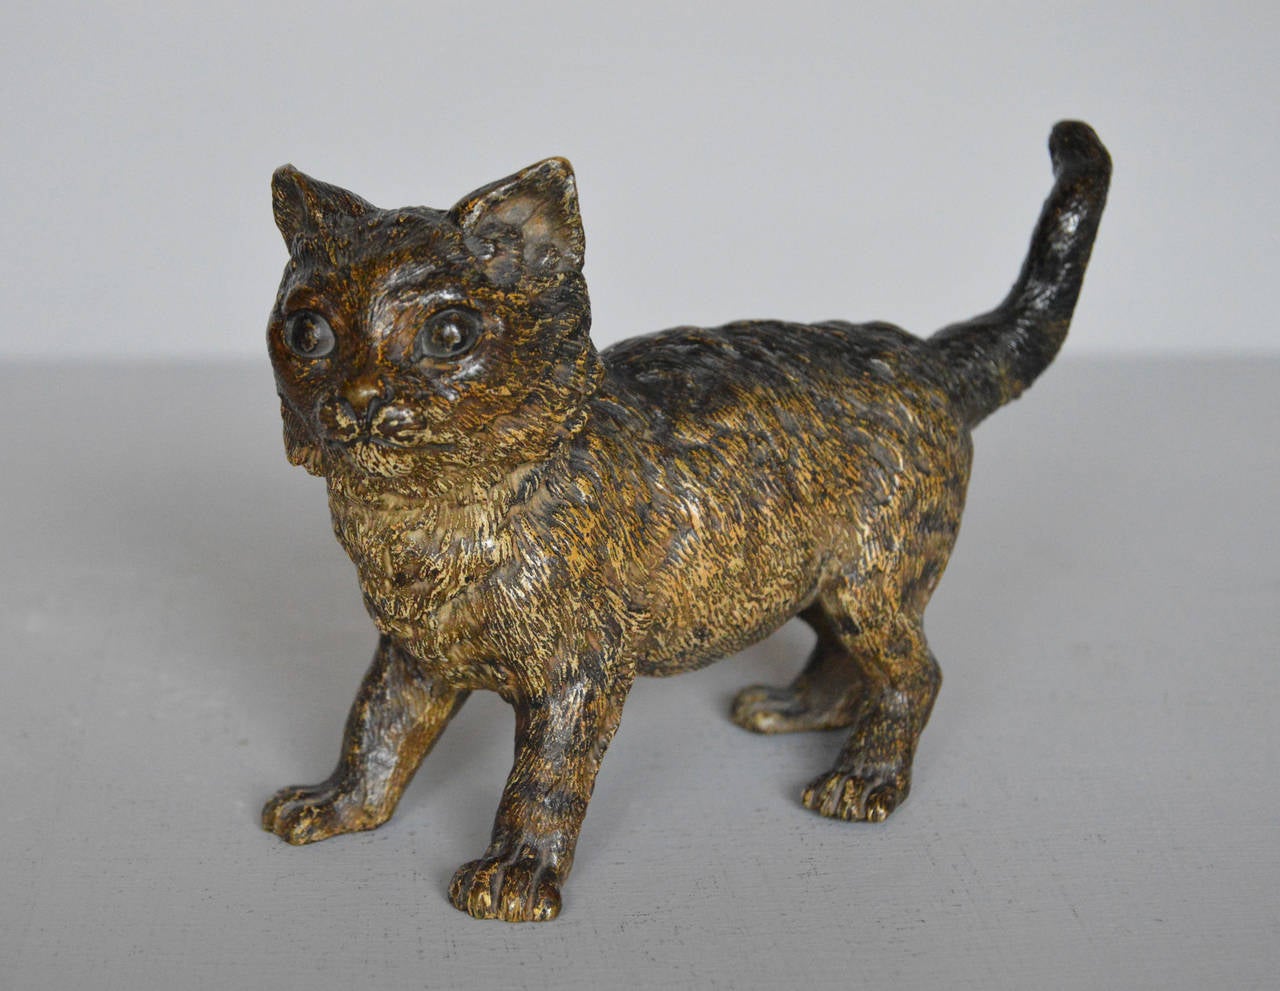 A good quality late 19th century sculpture of a cat with fine hand finished detail, or rare large size. Stamped ‘FB’ and ‘GESCHUTZT’ to the underside.

Height: 4½ inches
Width: 7 inches

Reference: Antique Vienna Bronzes by Josef Zobel, p72, 79